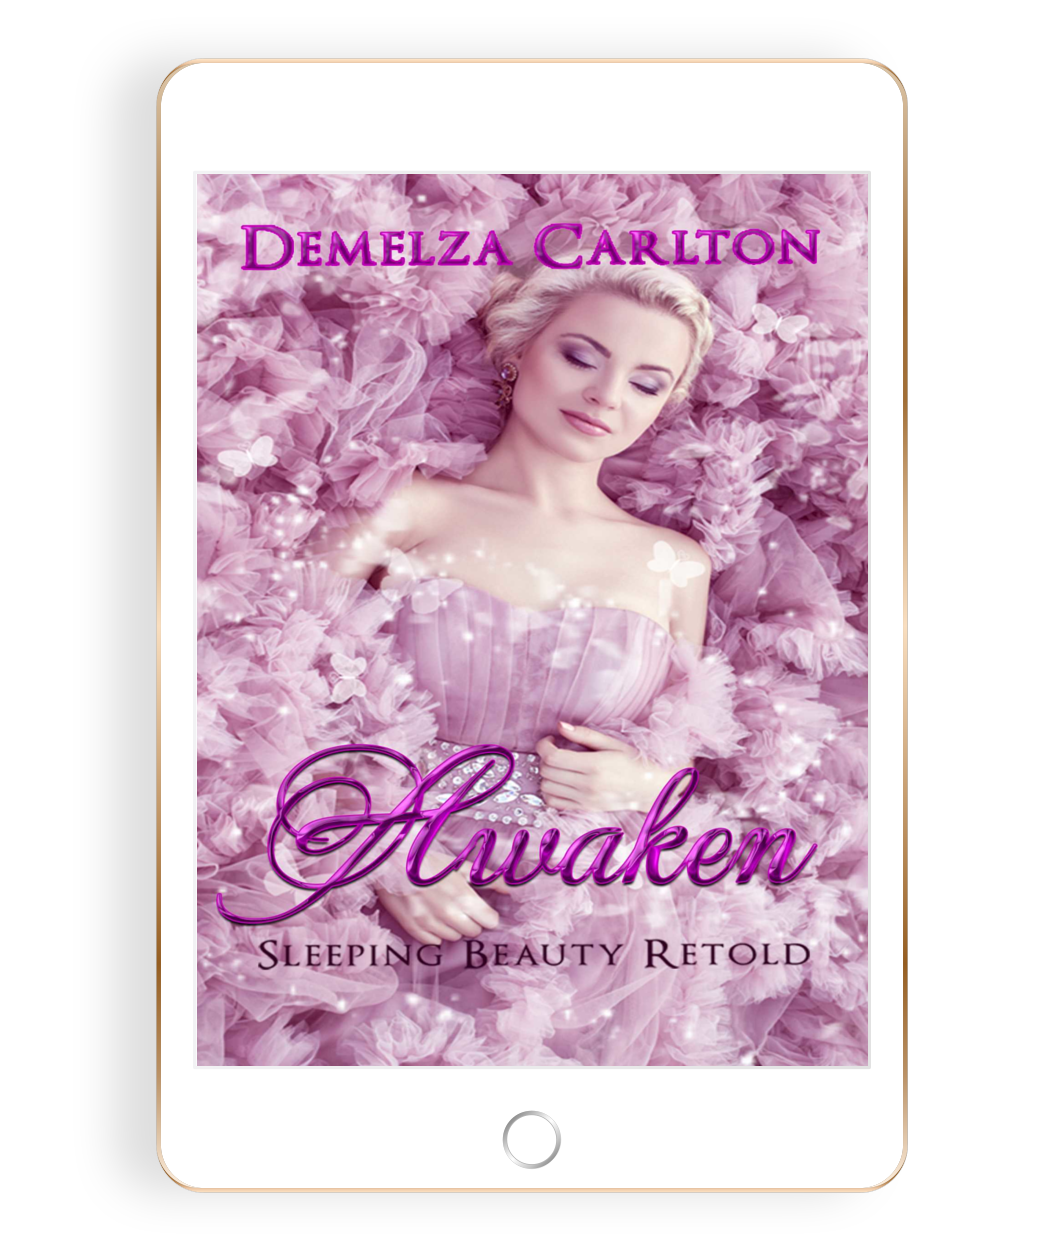 Awaken: Sleeping Beauty Retold Book 6 in the Romance a Medieval Fairytale series by USA Today Bestselling Author Demelza Carlton